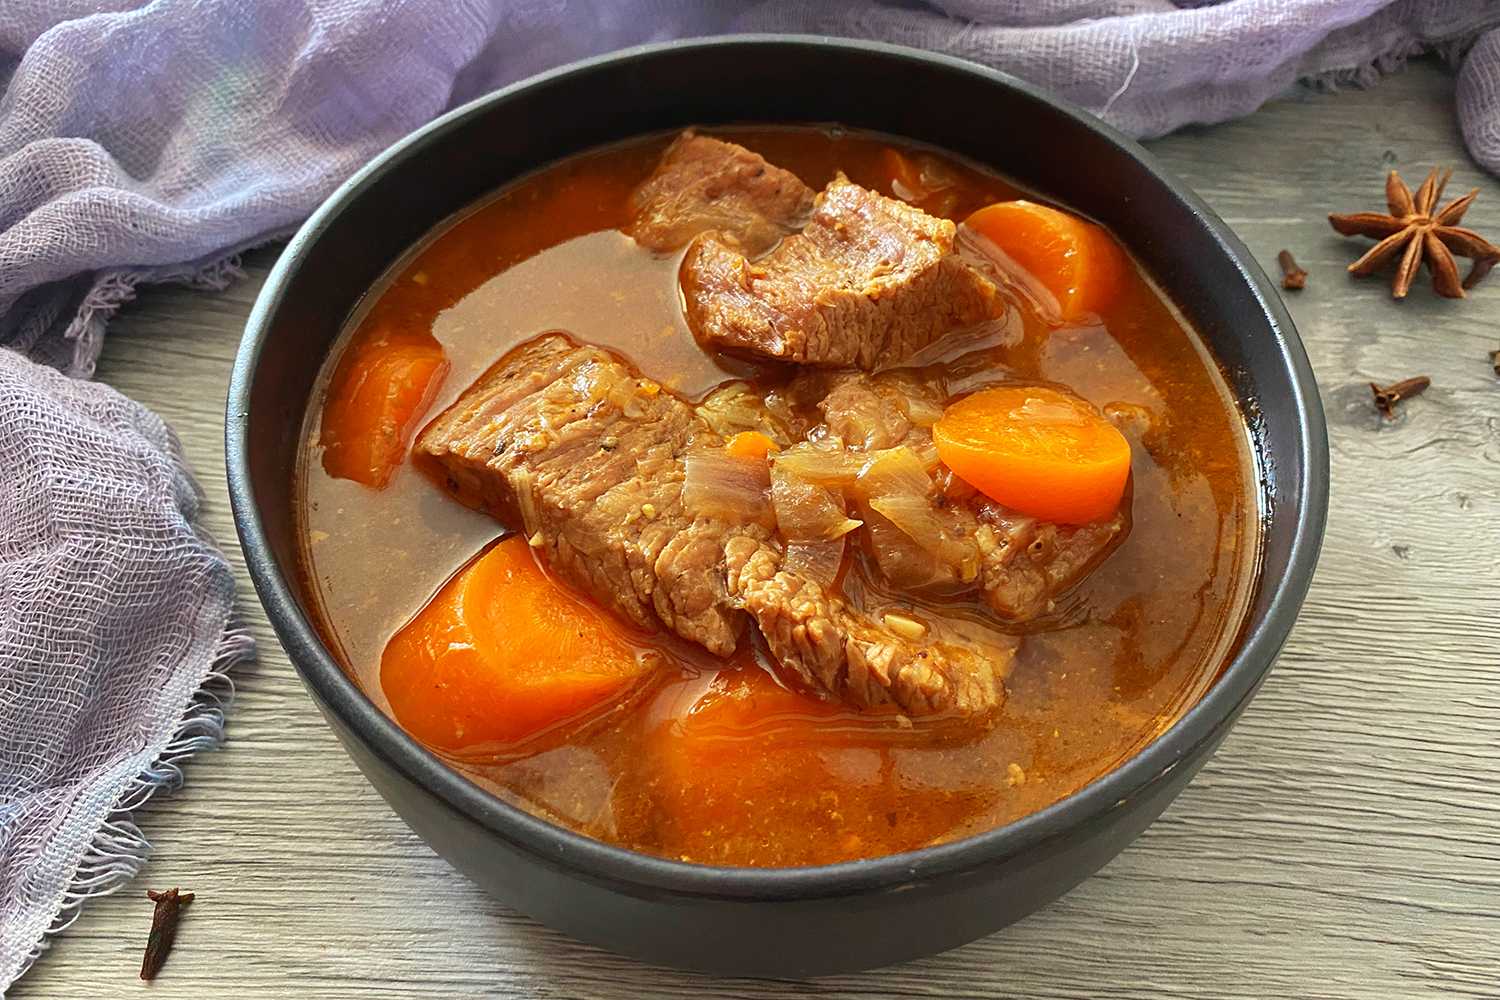 Clear soup with beef shank, carrot cubes and chopped onion in a black bowl